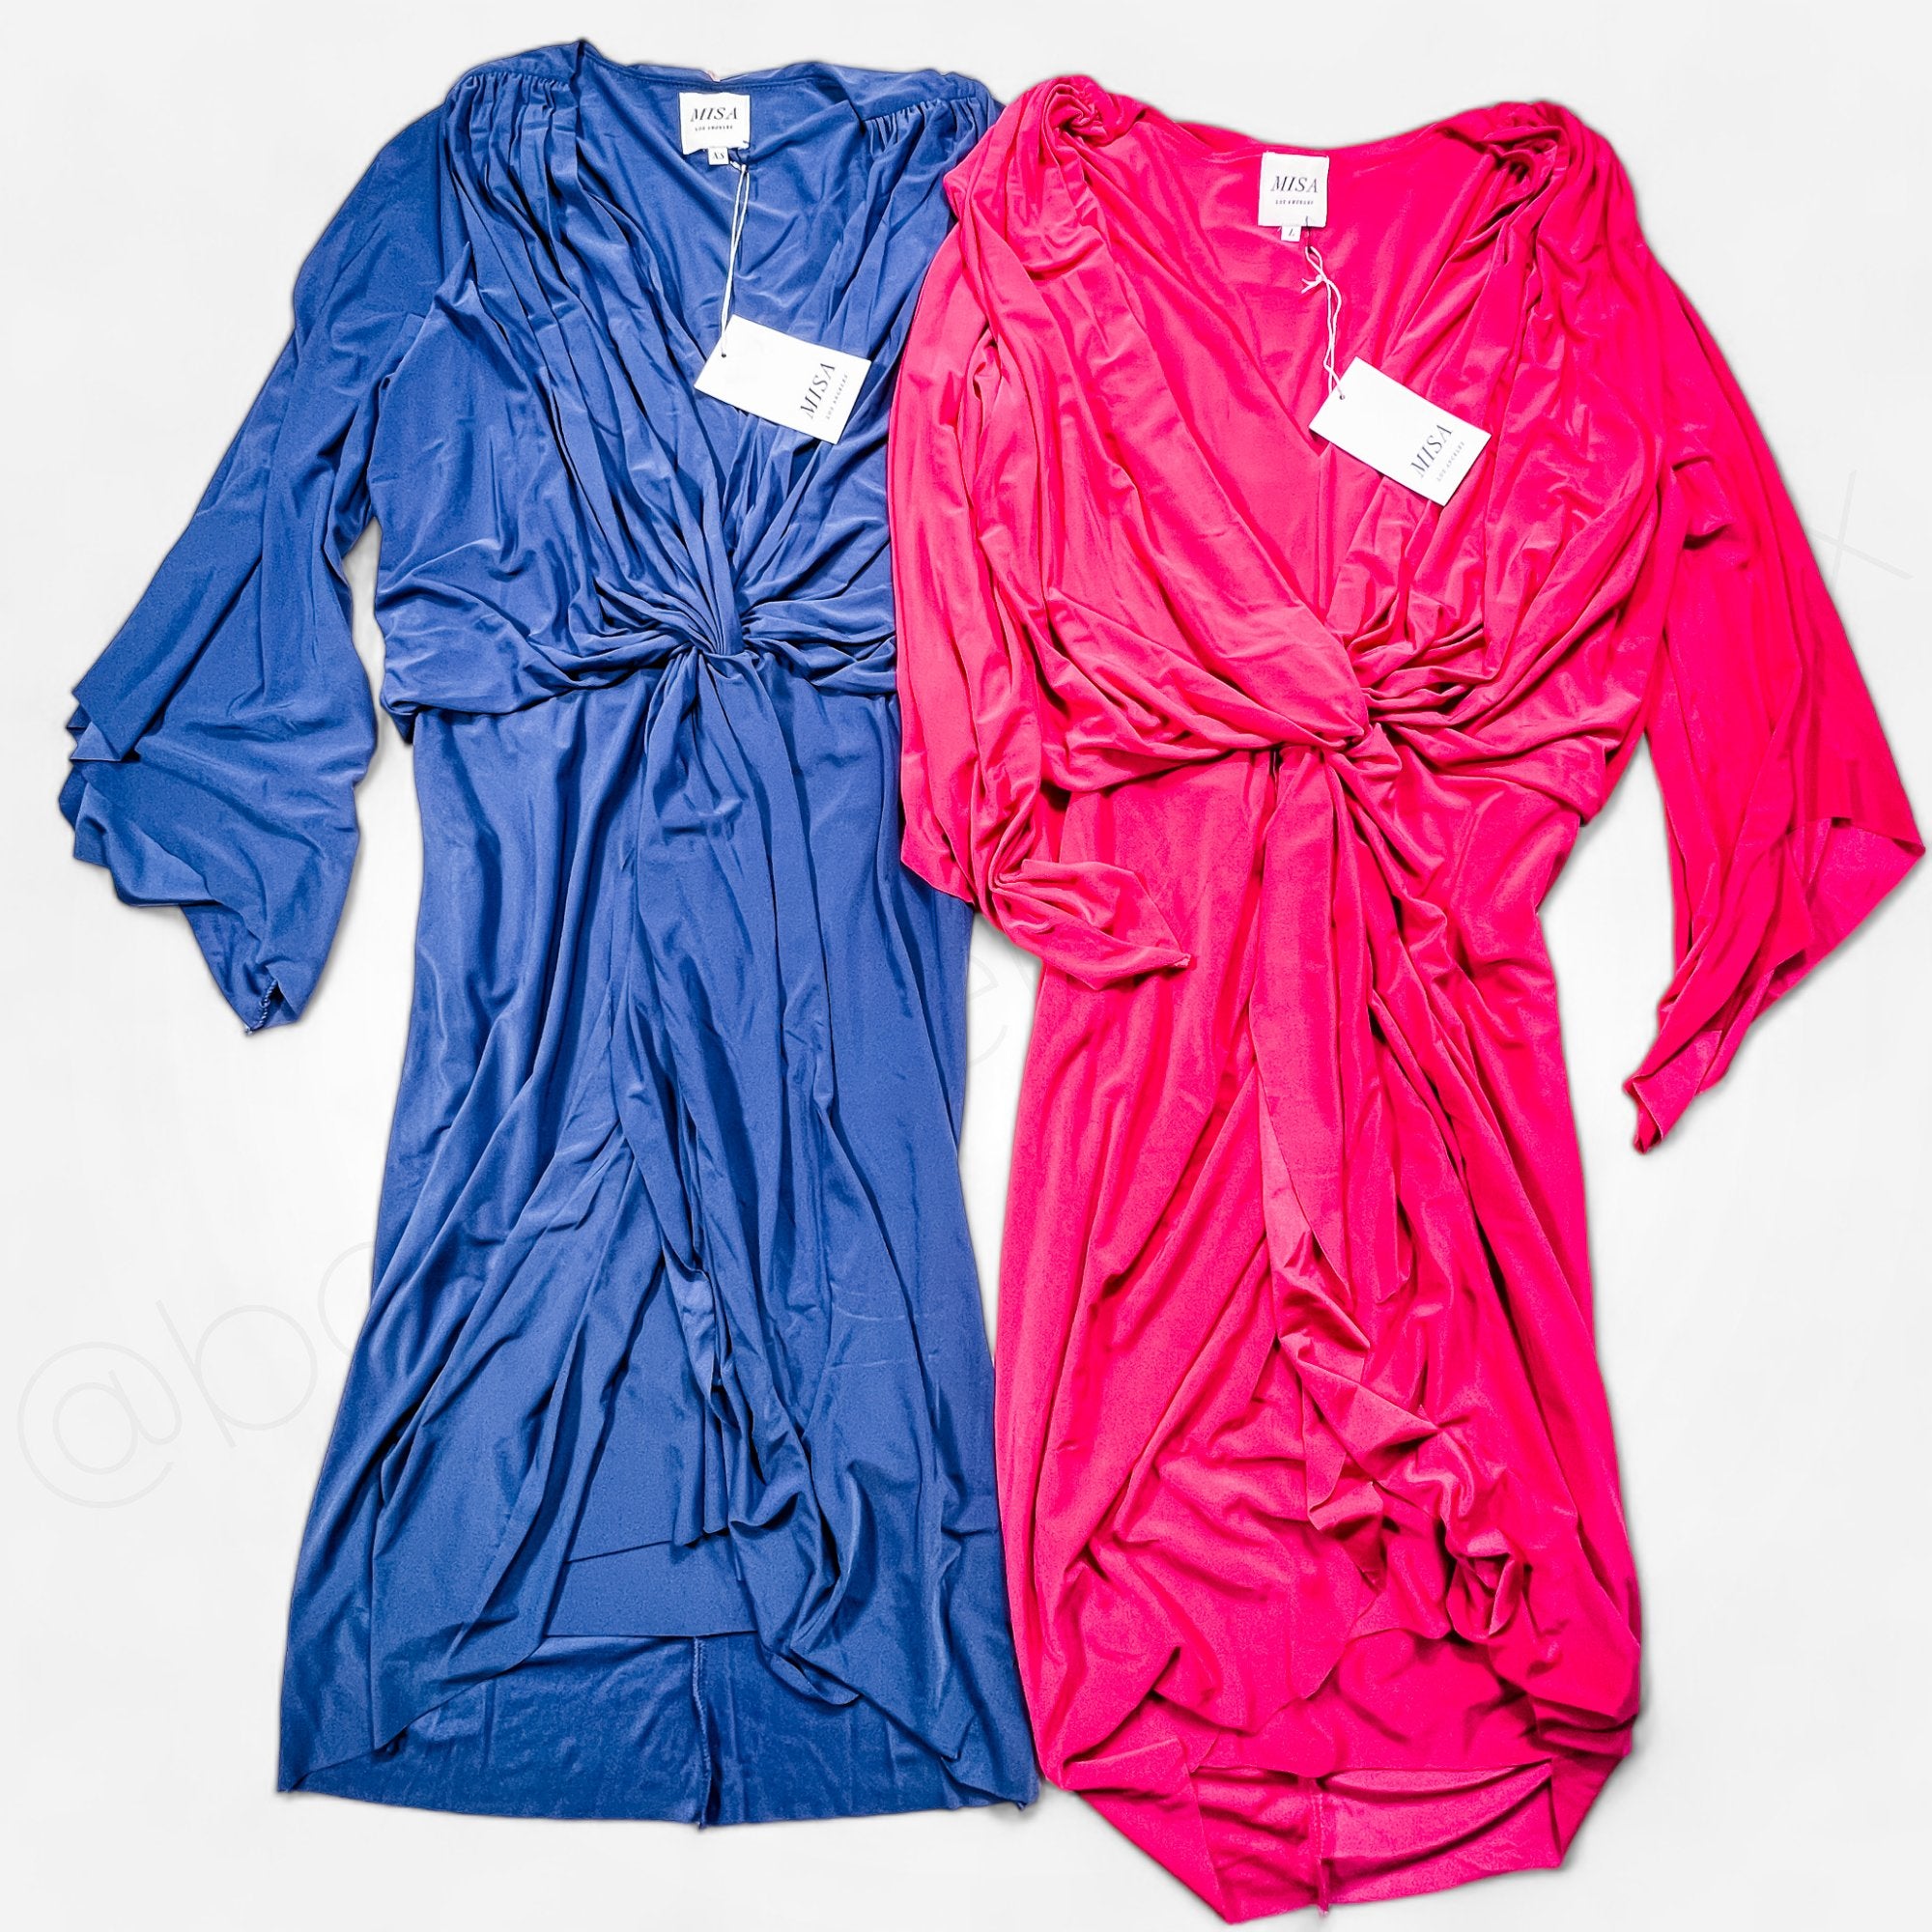 MISA Los Angeles Dresses Women's New Wholesale Clothing - Boutique by the Box Wholesale for Resellers